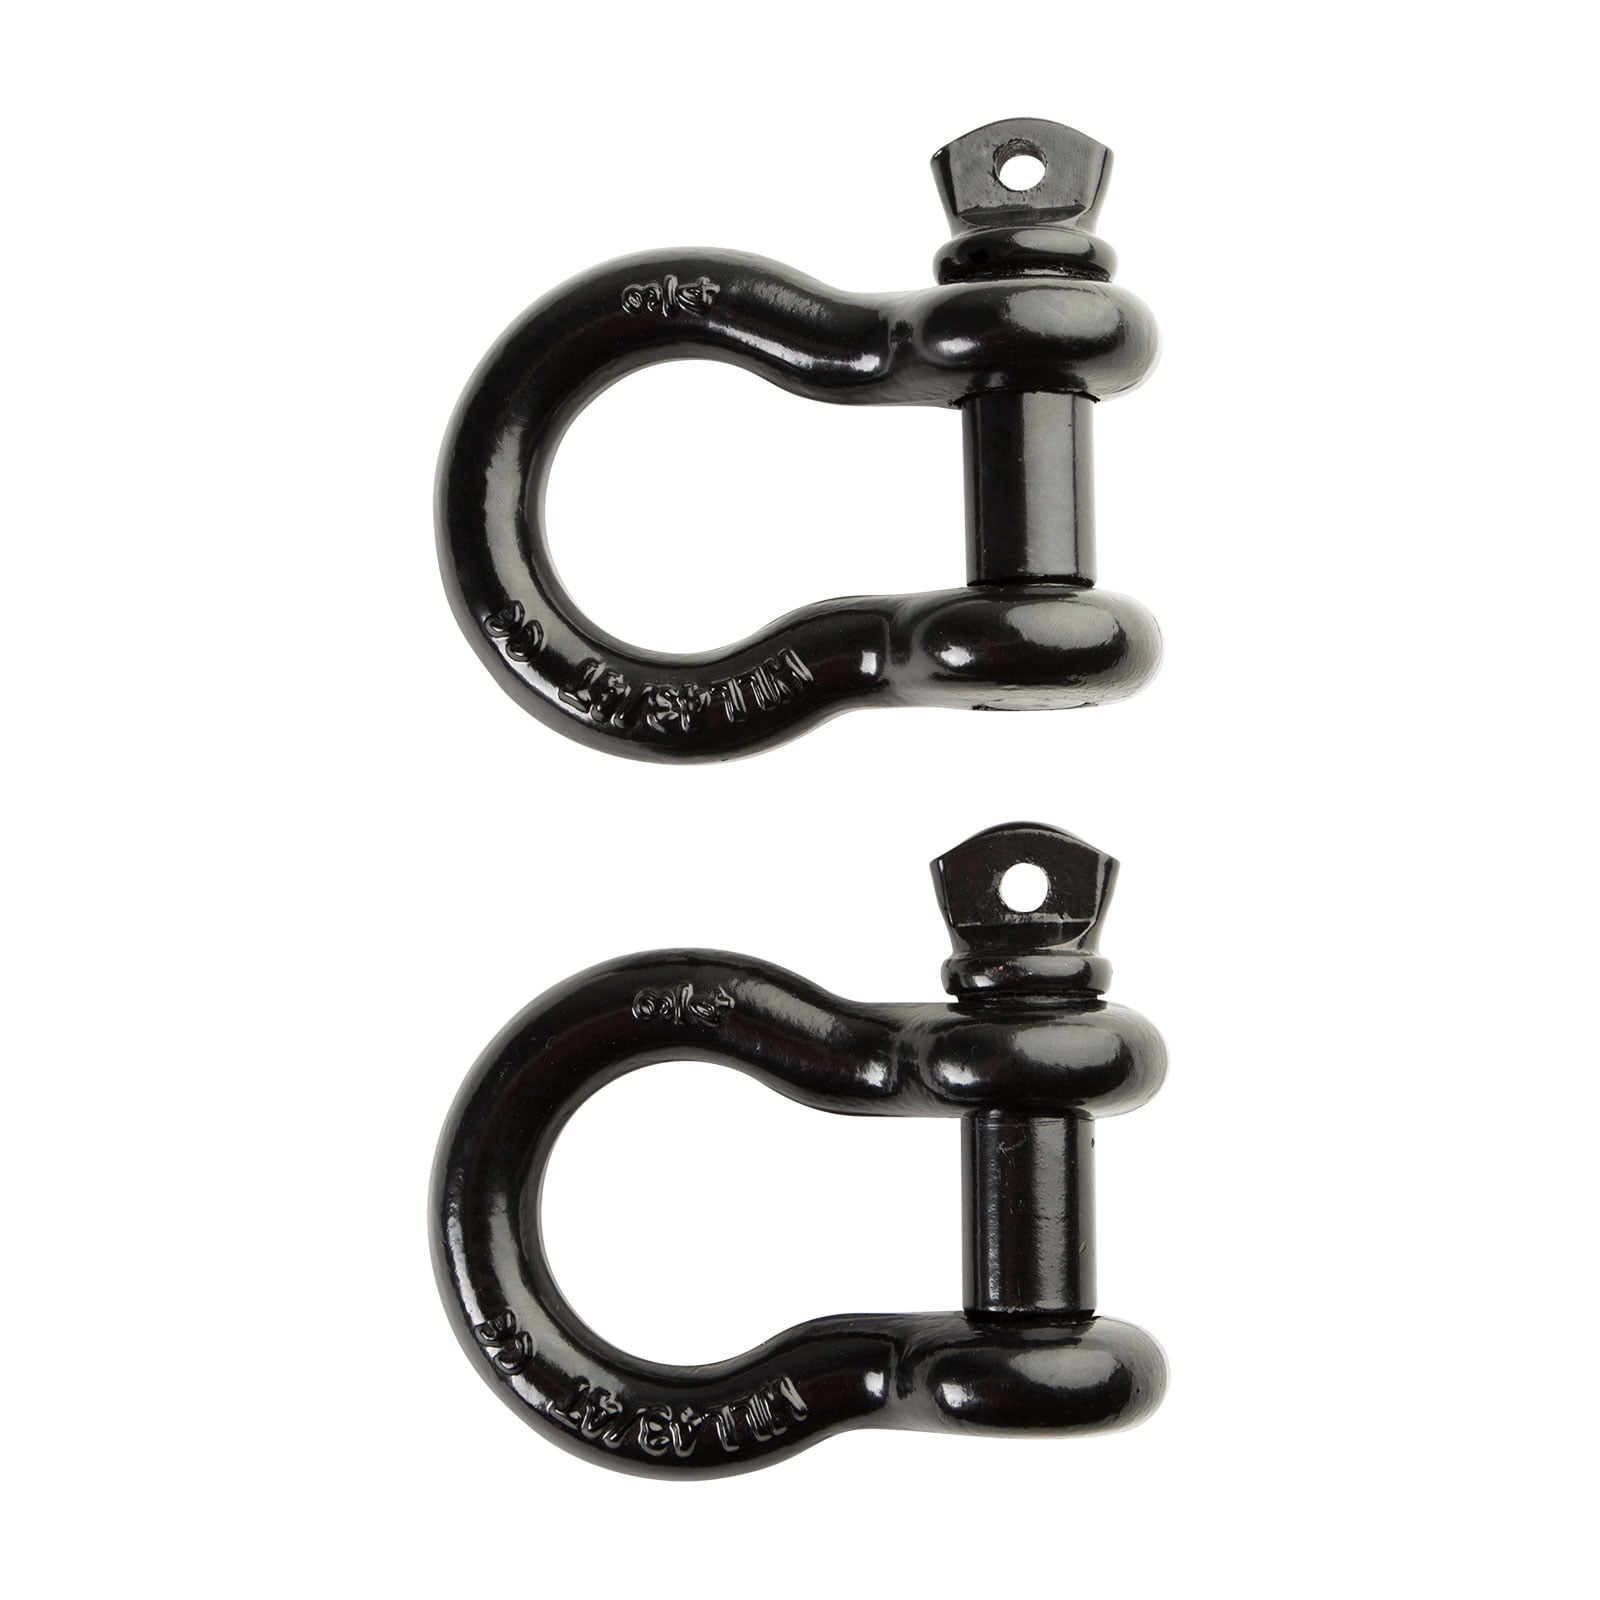 10PCS 5/32 M4 304 Stainless Steel D Ring Shackle Lock for Heavy Duty Construction,Vehicle Recovery Hauling 